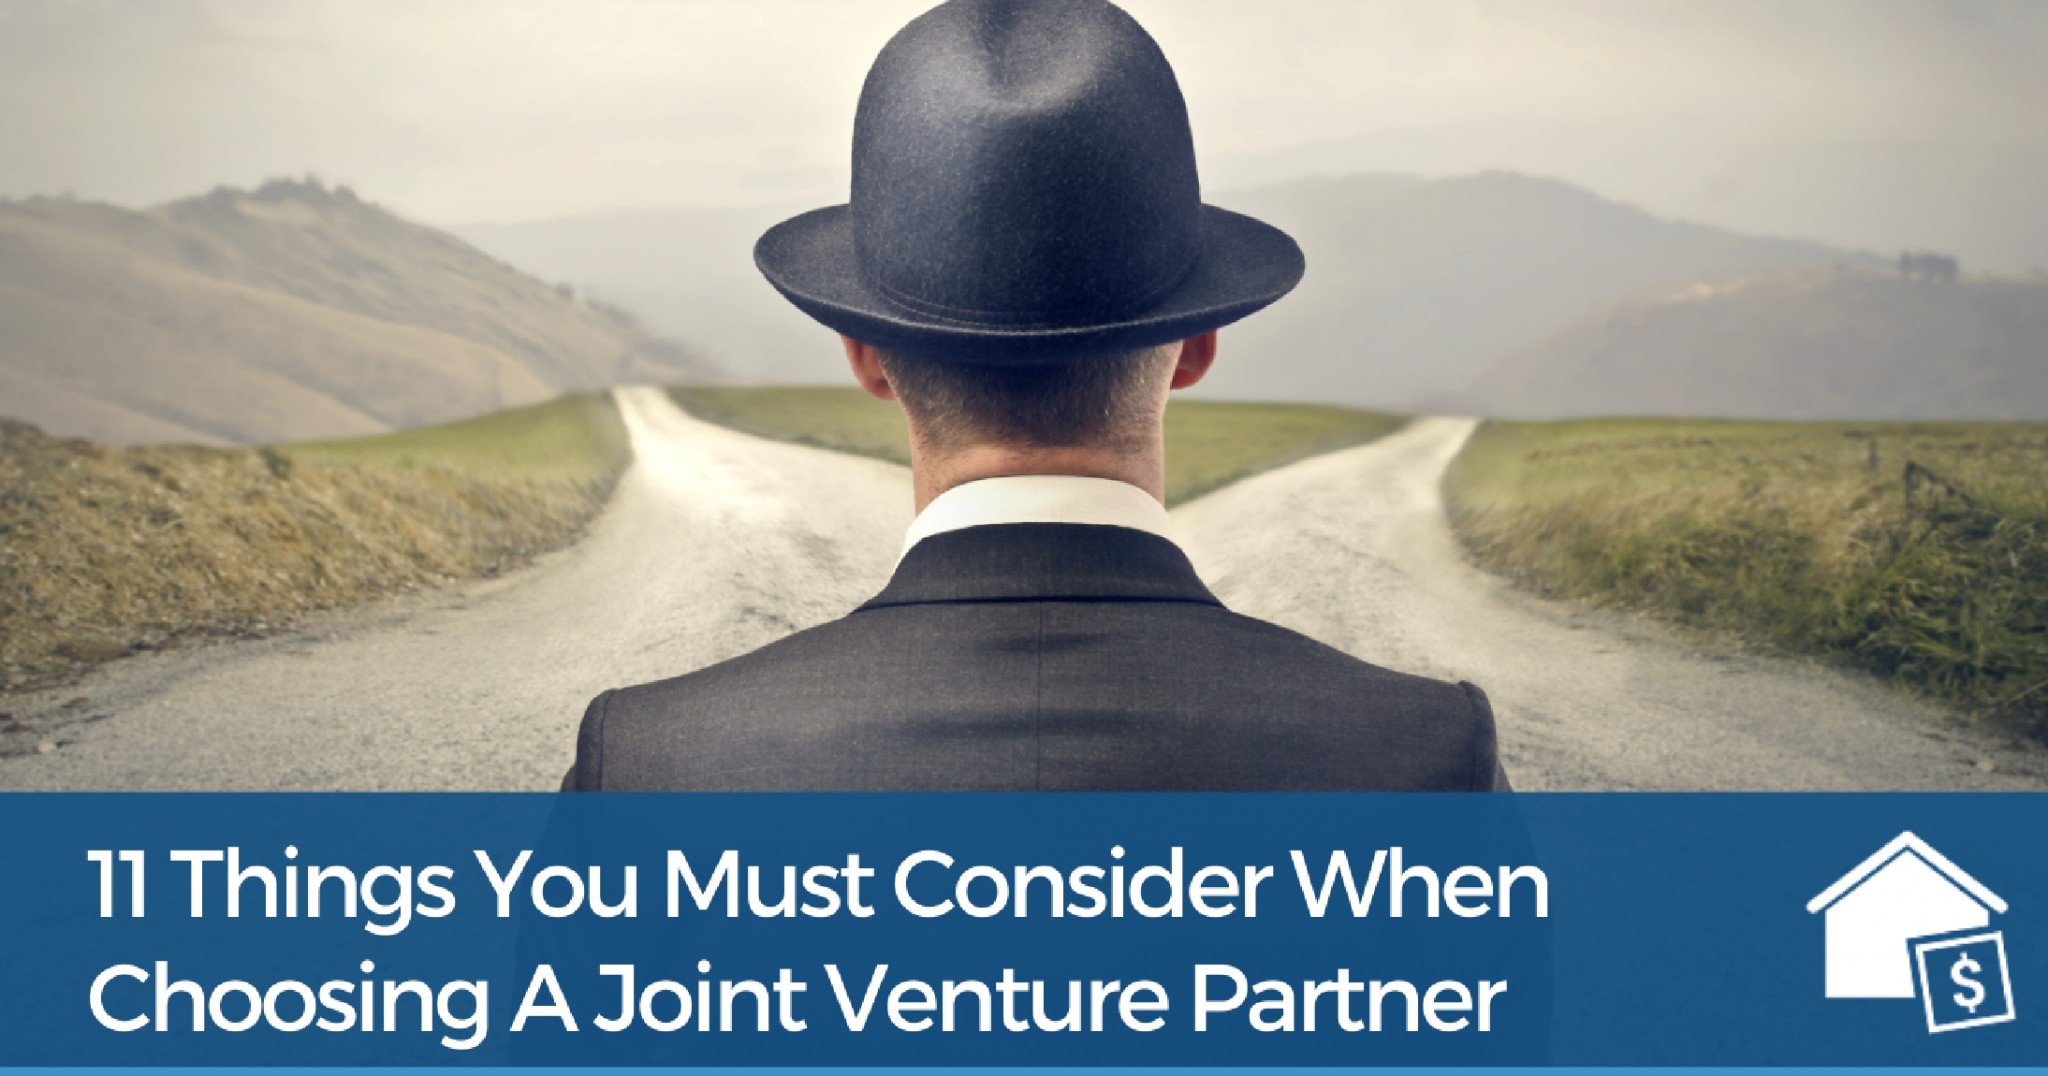 11 Things You Must Consider When Choosing A Joint Venture Partner